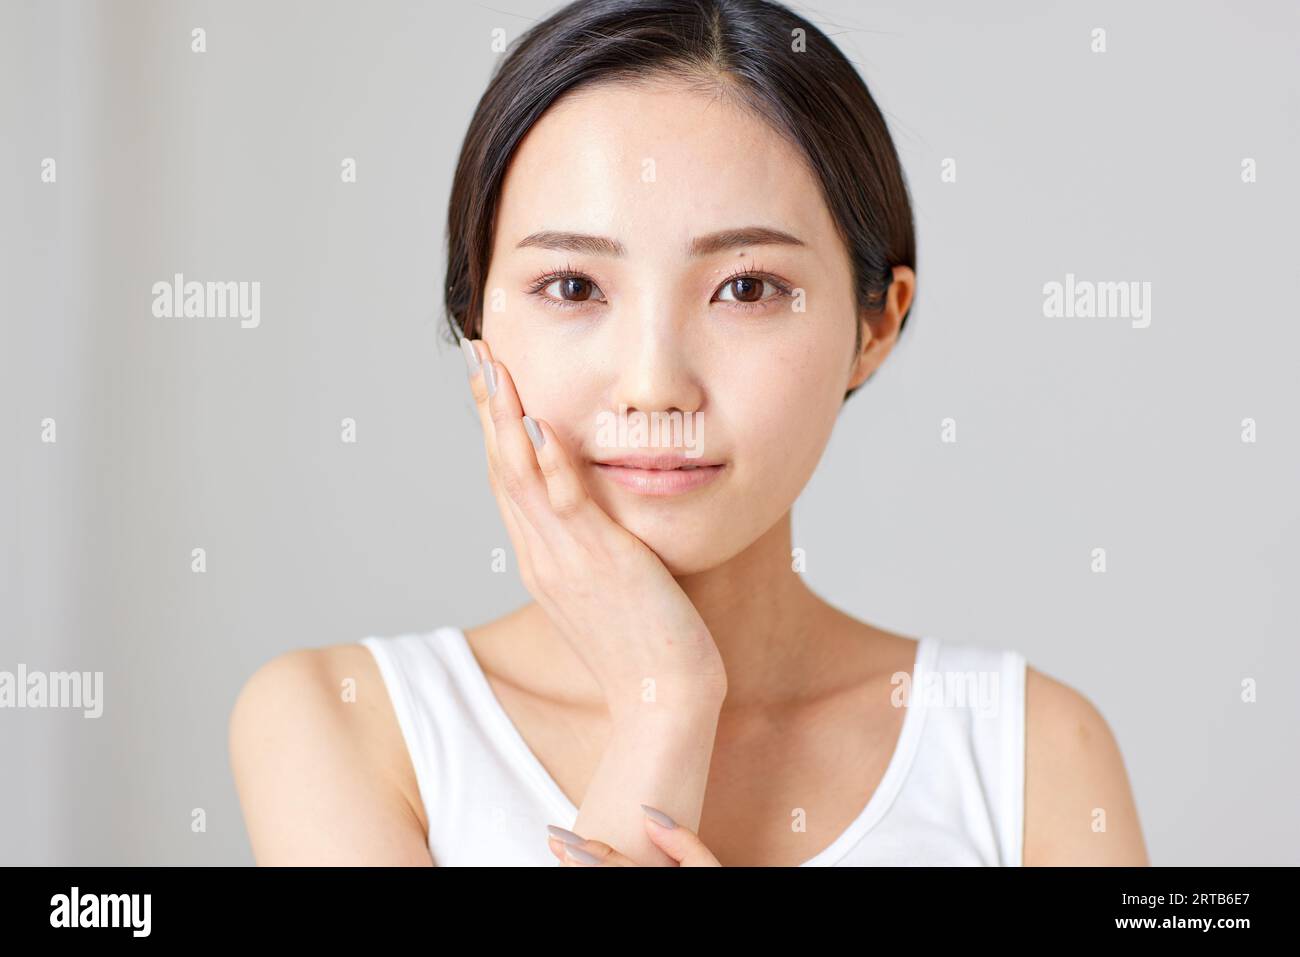 Young Japanese woman beauty portrait Stock Photo